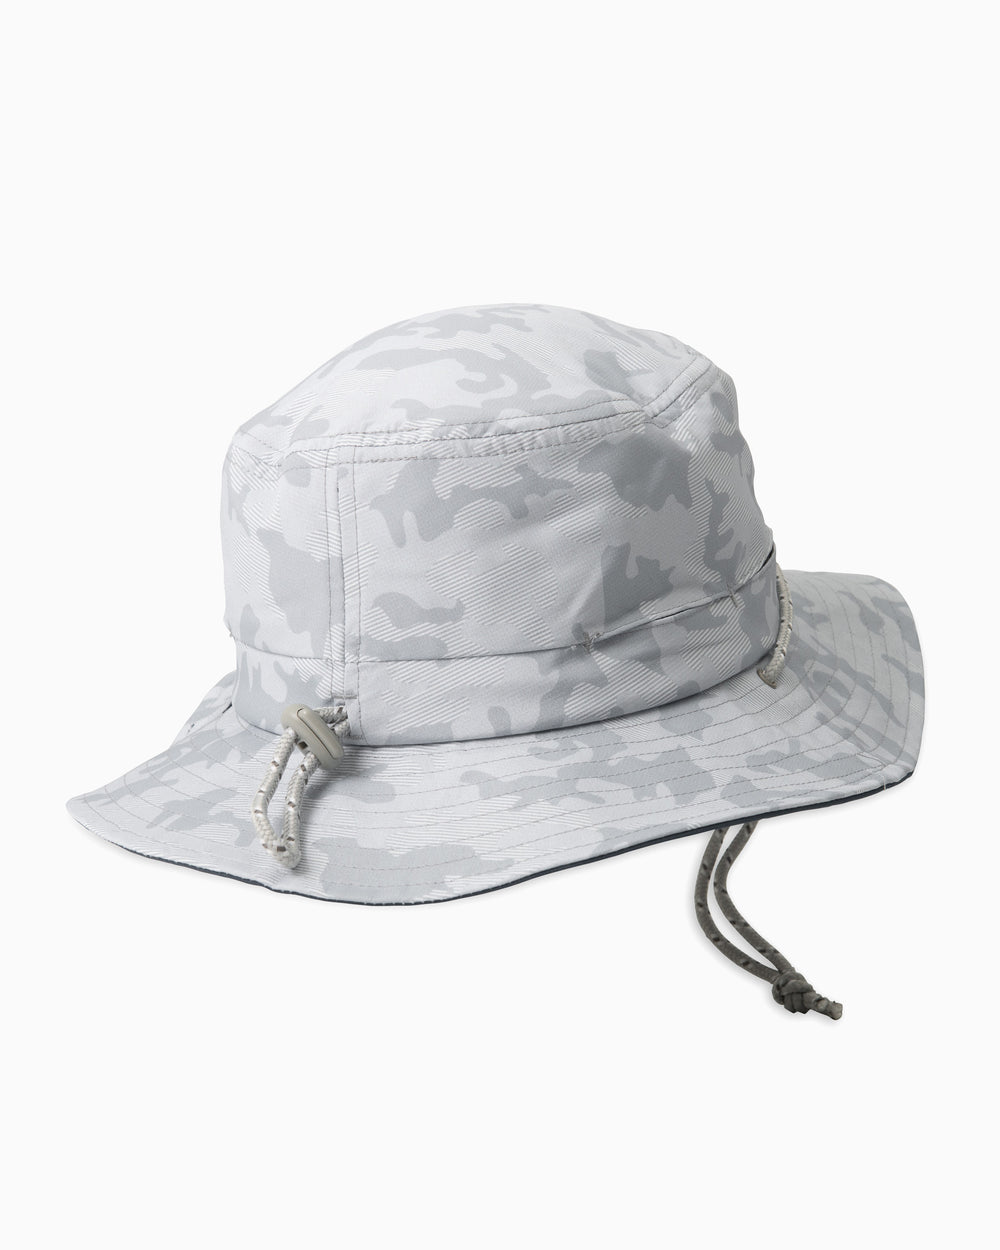 The back of the Waterway Camo Print Performance Sun Hat by Southern Tide - Seagull Grey